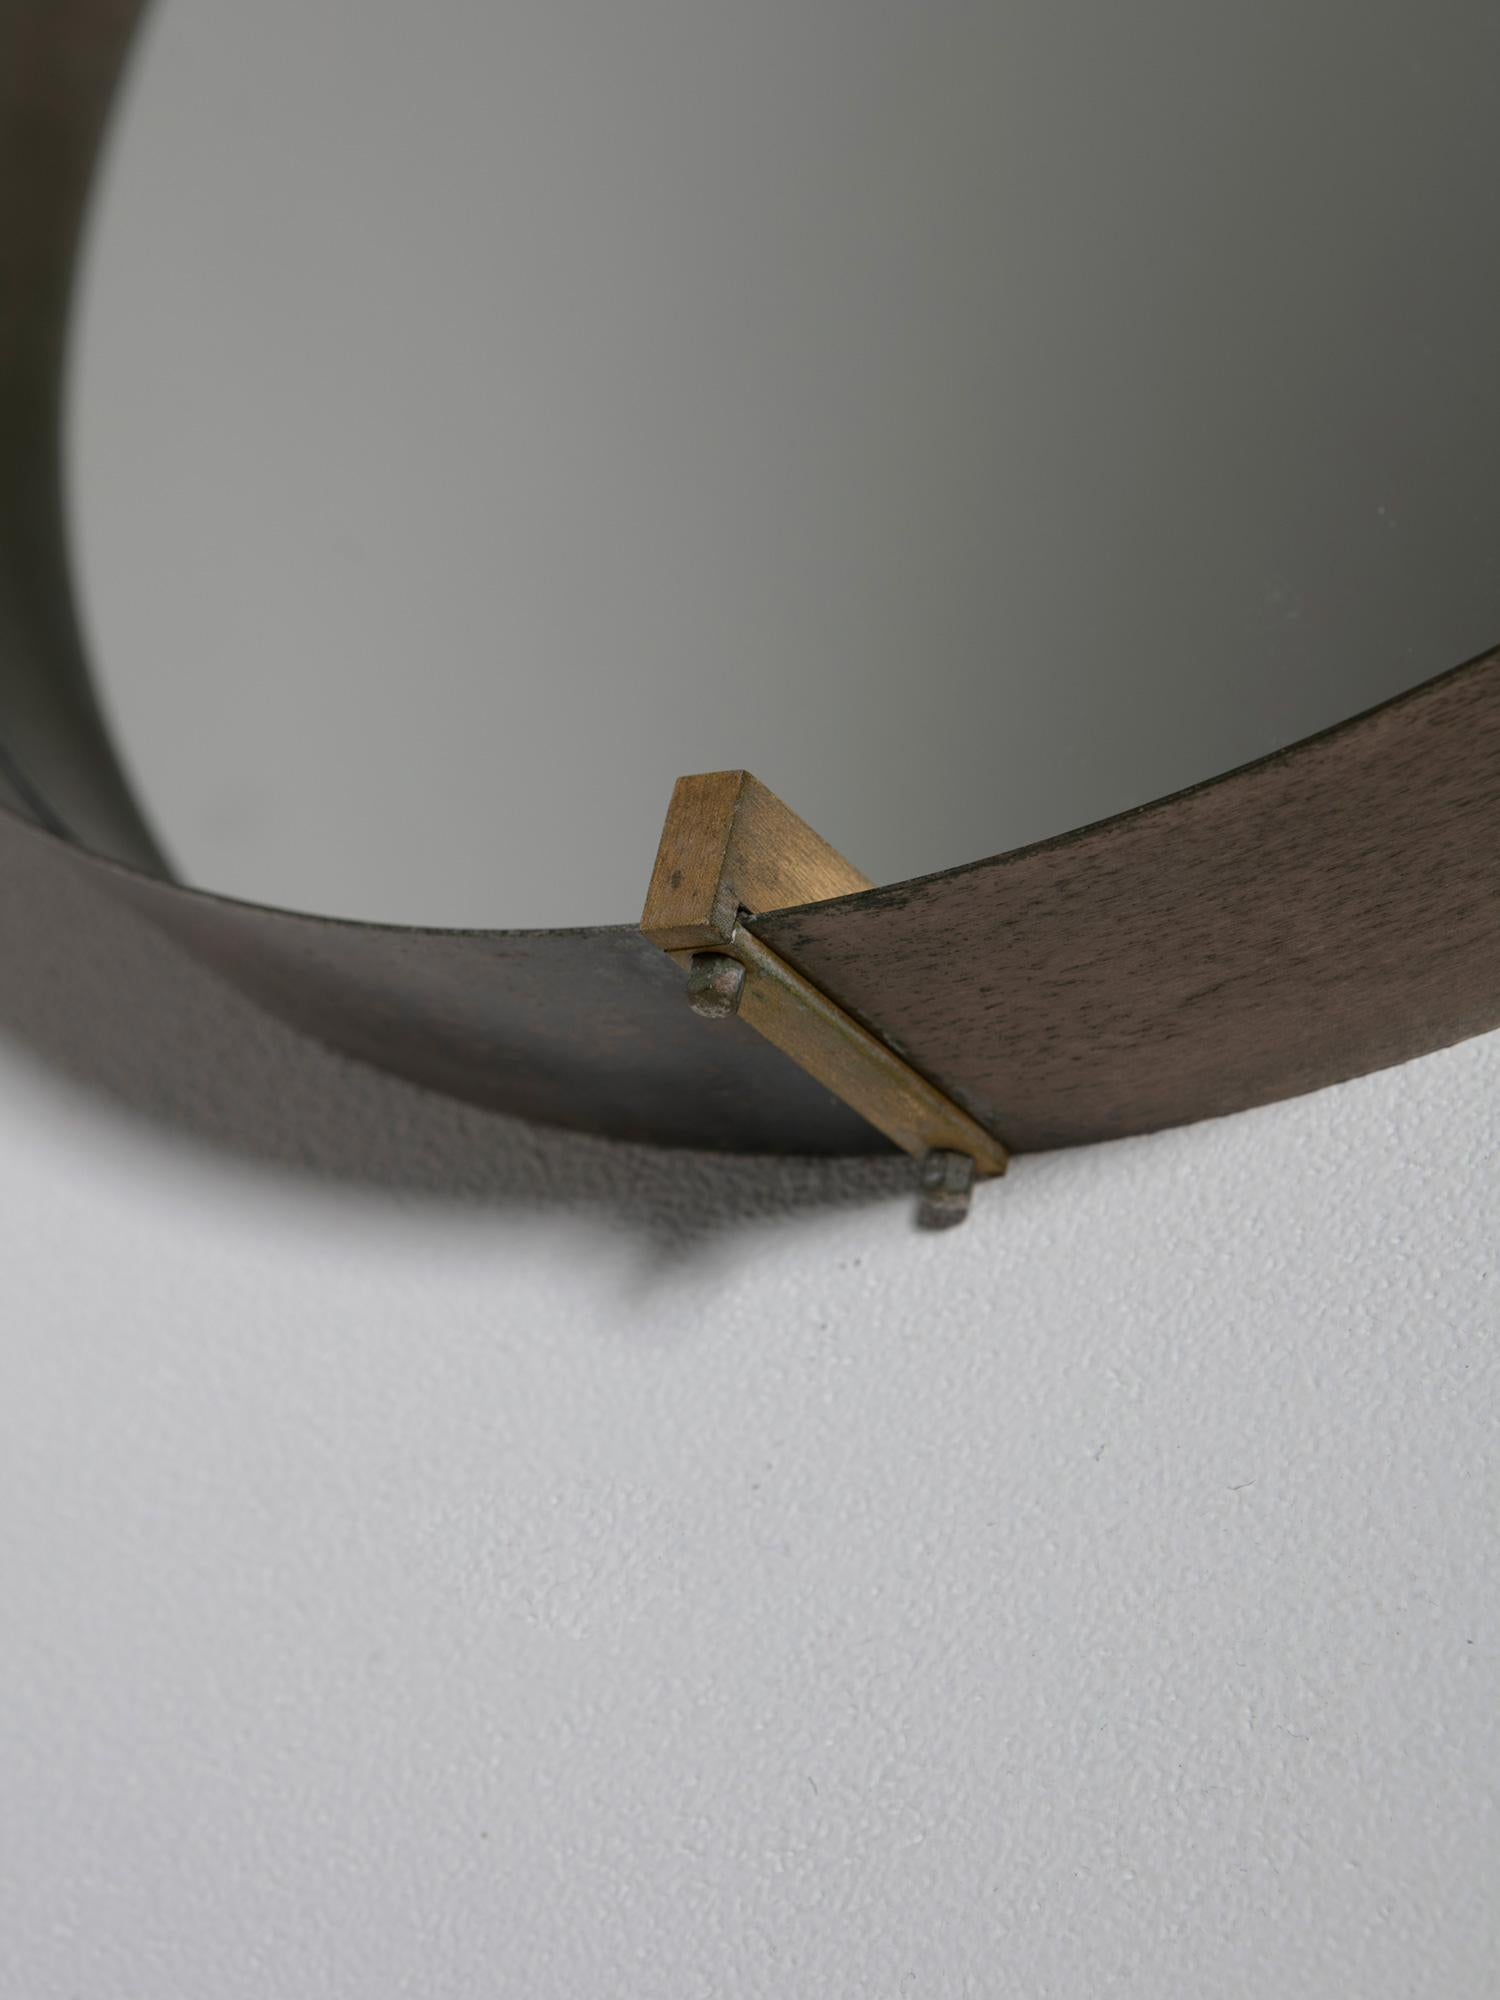 Steel frame with brass details for this double sided wall mirror manufactured by Santambrogio and De Berti.